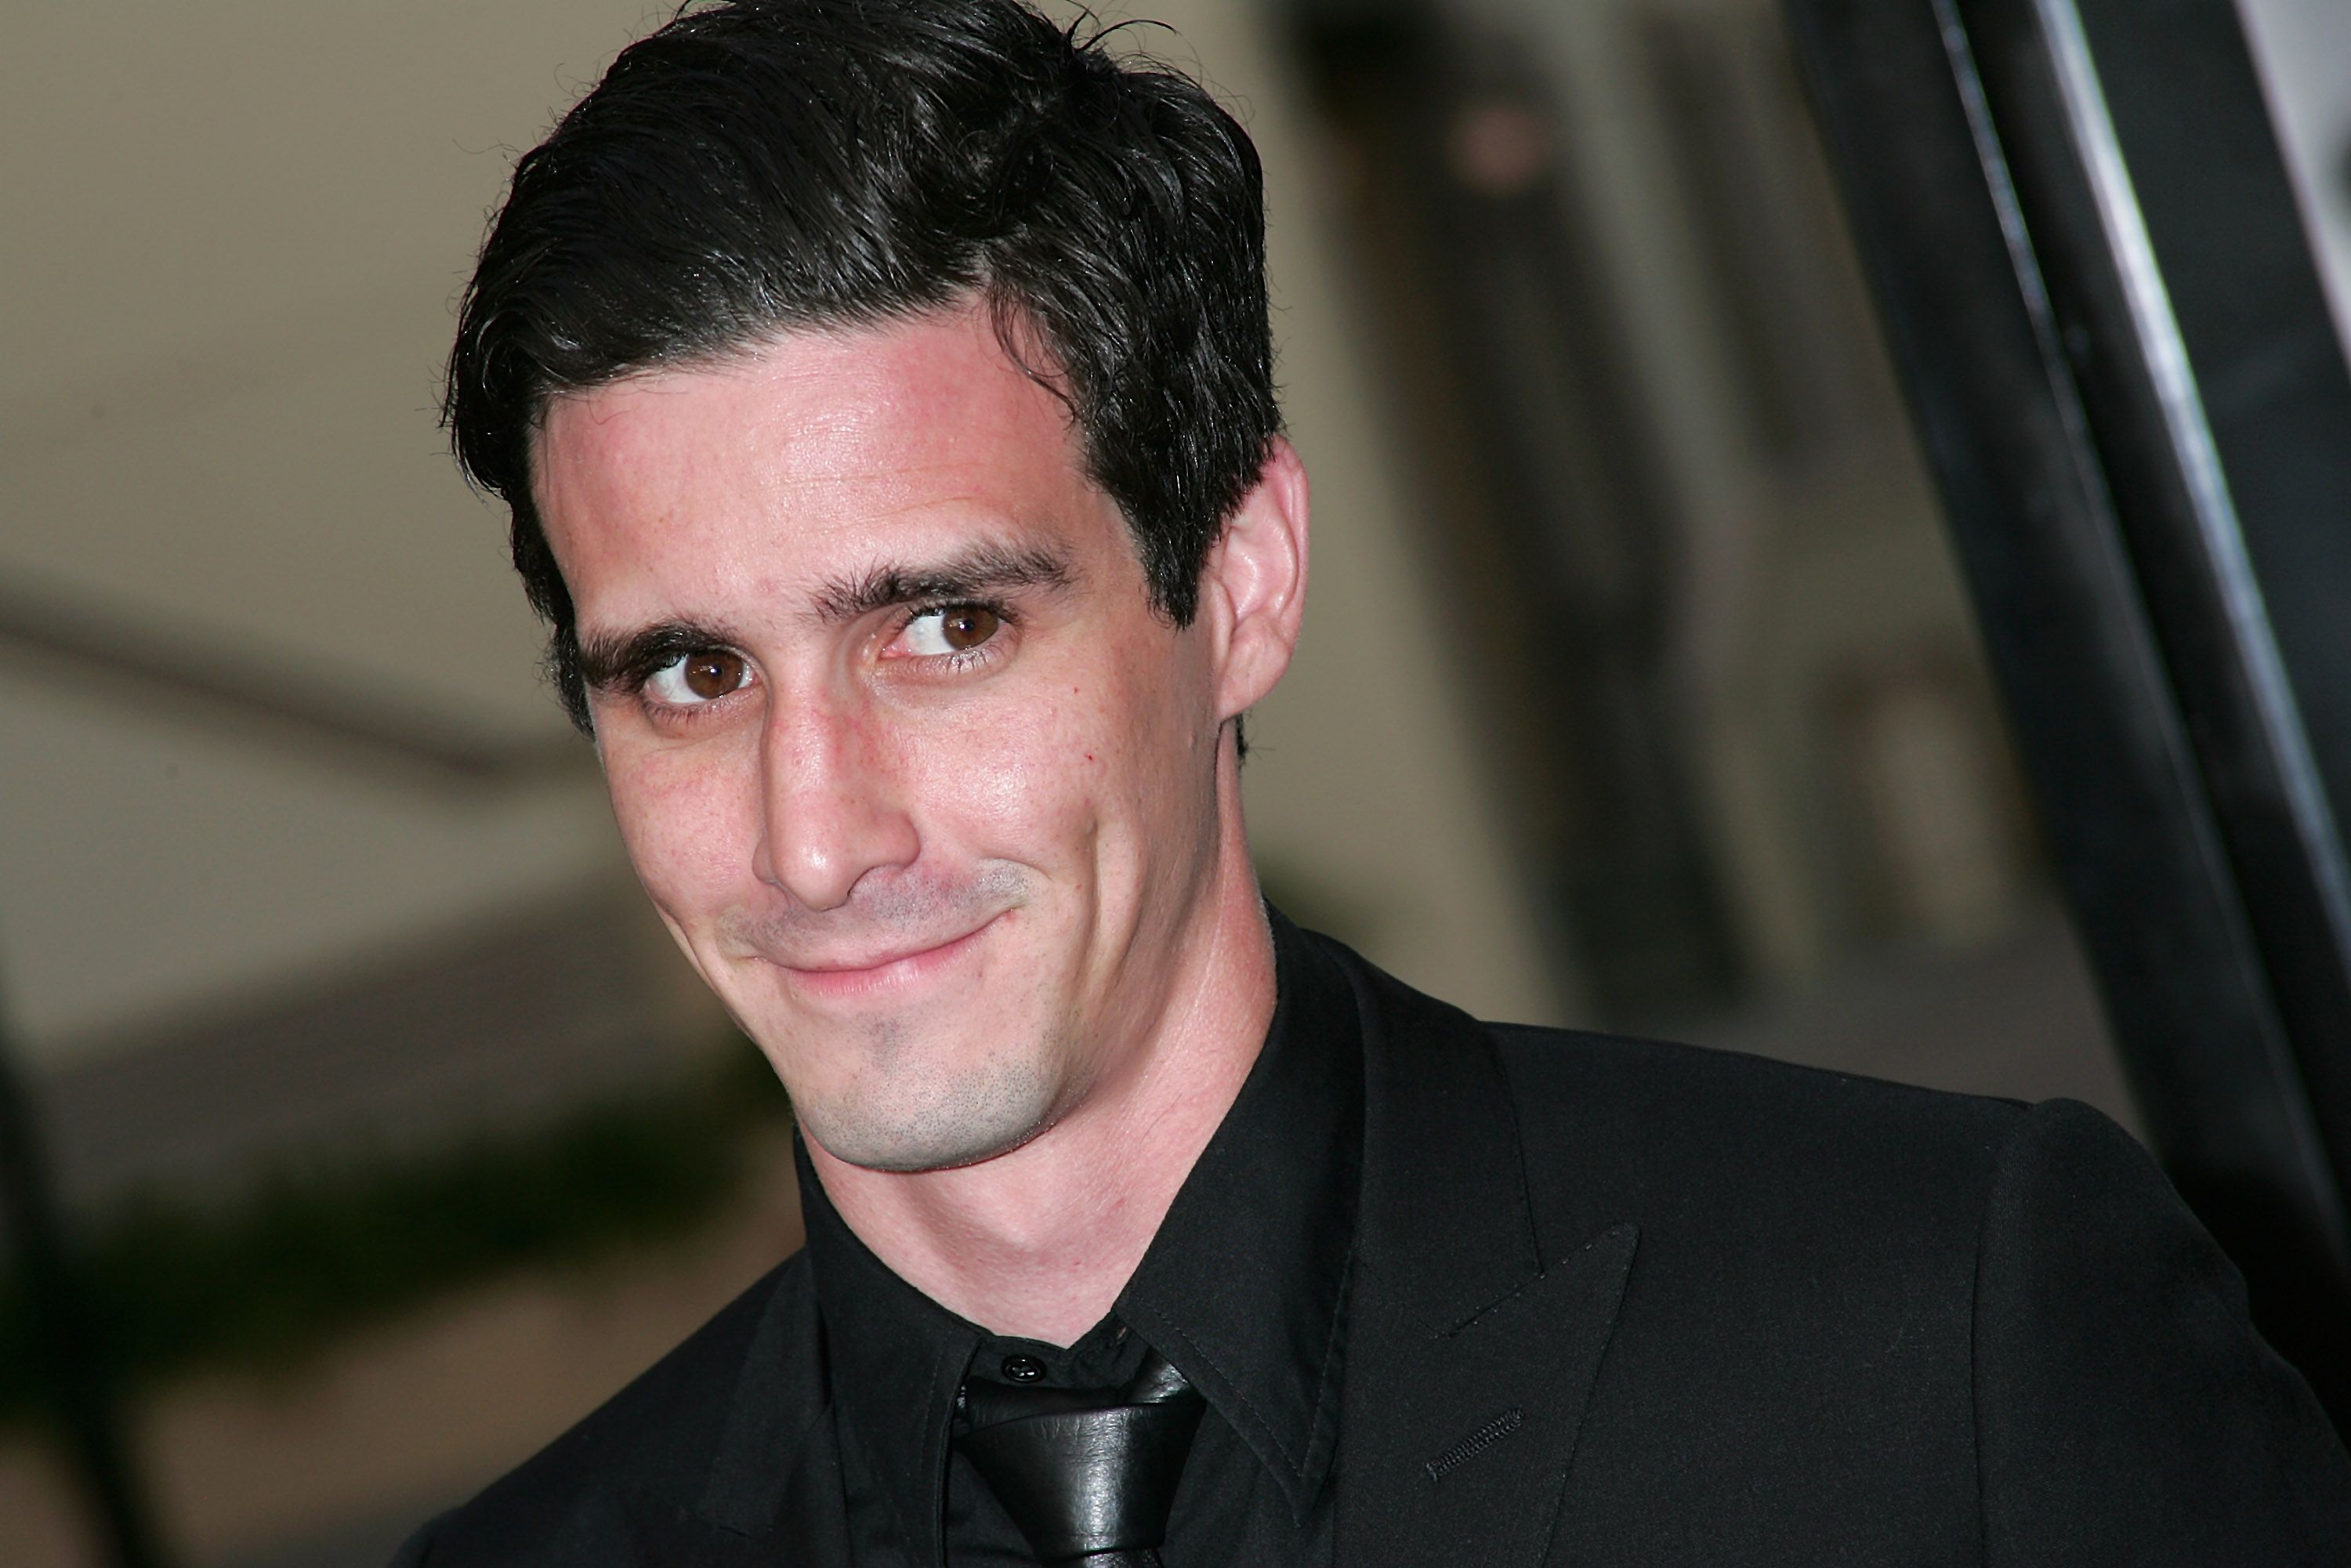 James Ransone  at premiere of the HBO miniseries "Generation Kill" in 2008 in Hollywood, California | Source: Getty Images